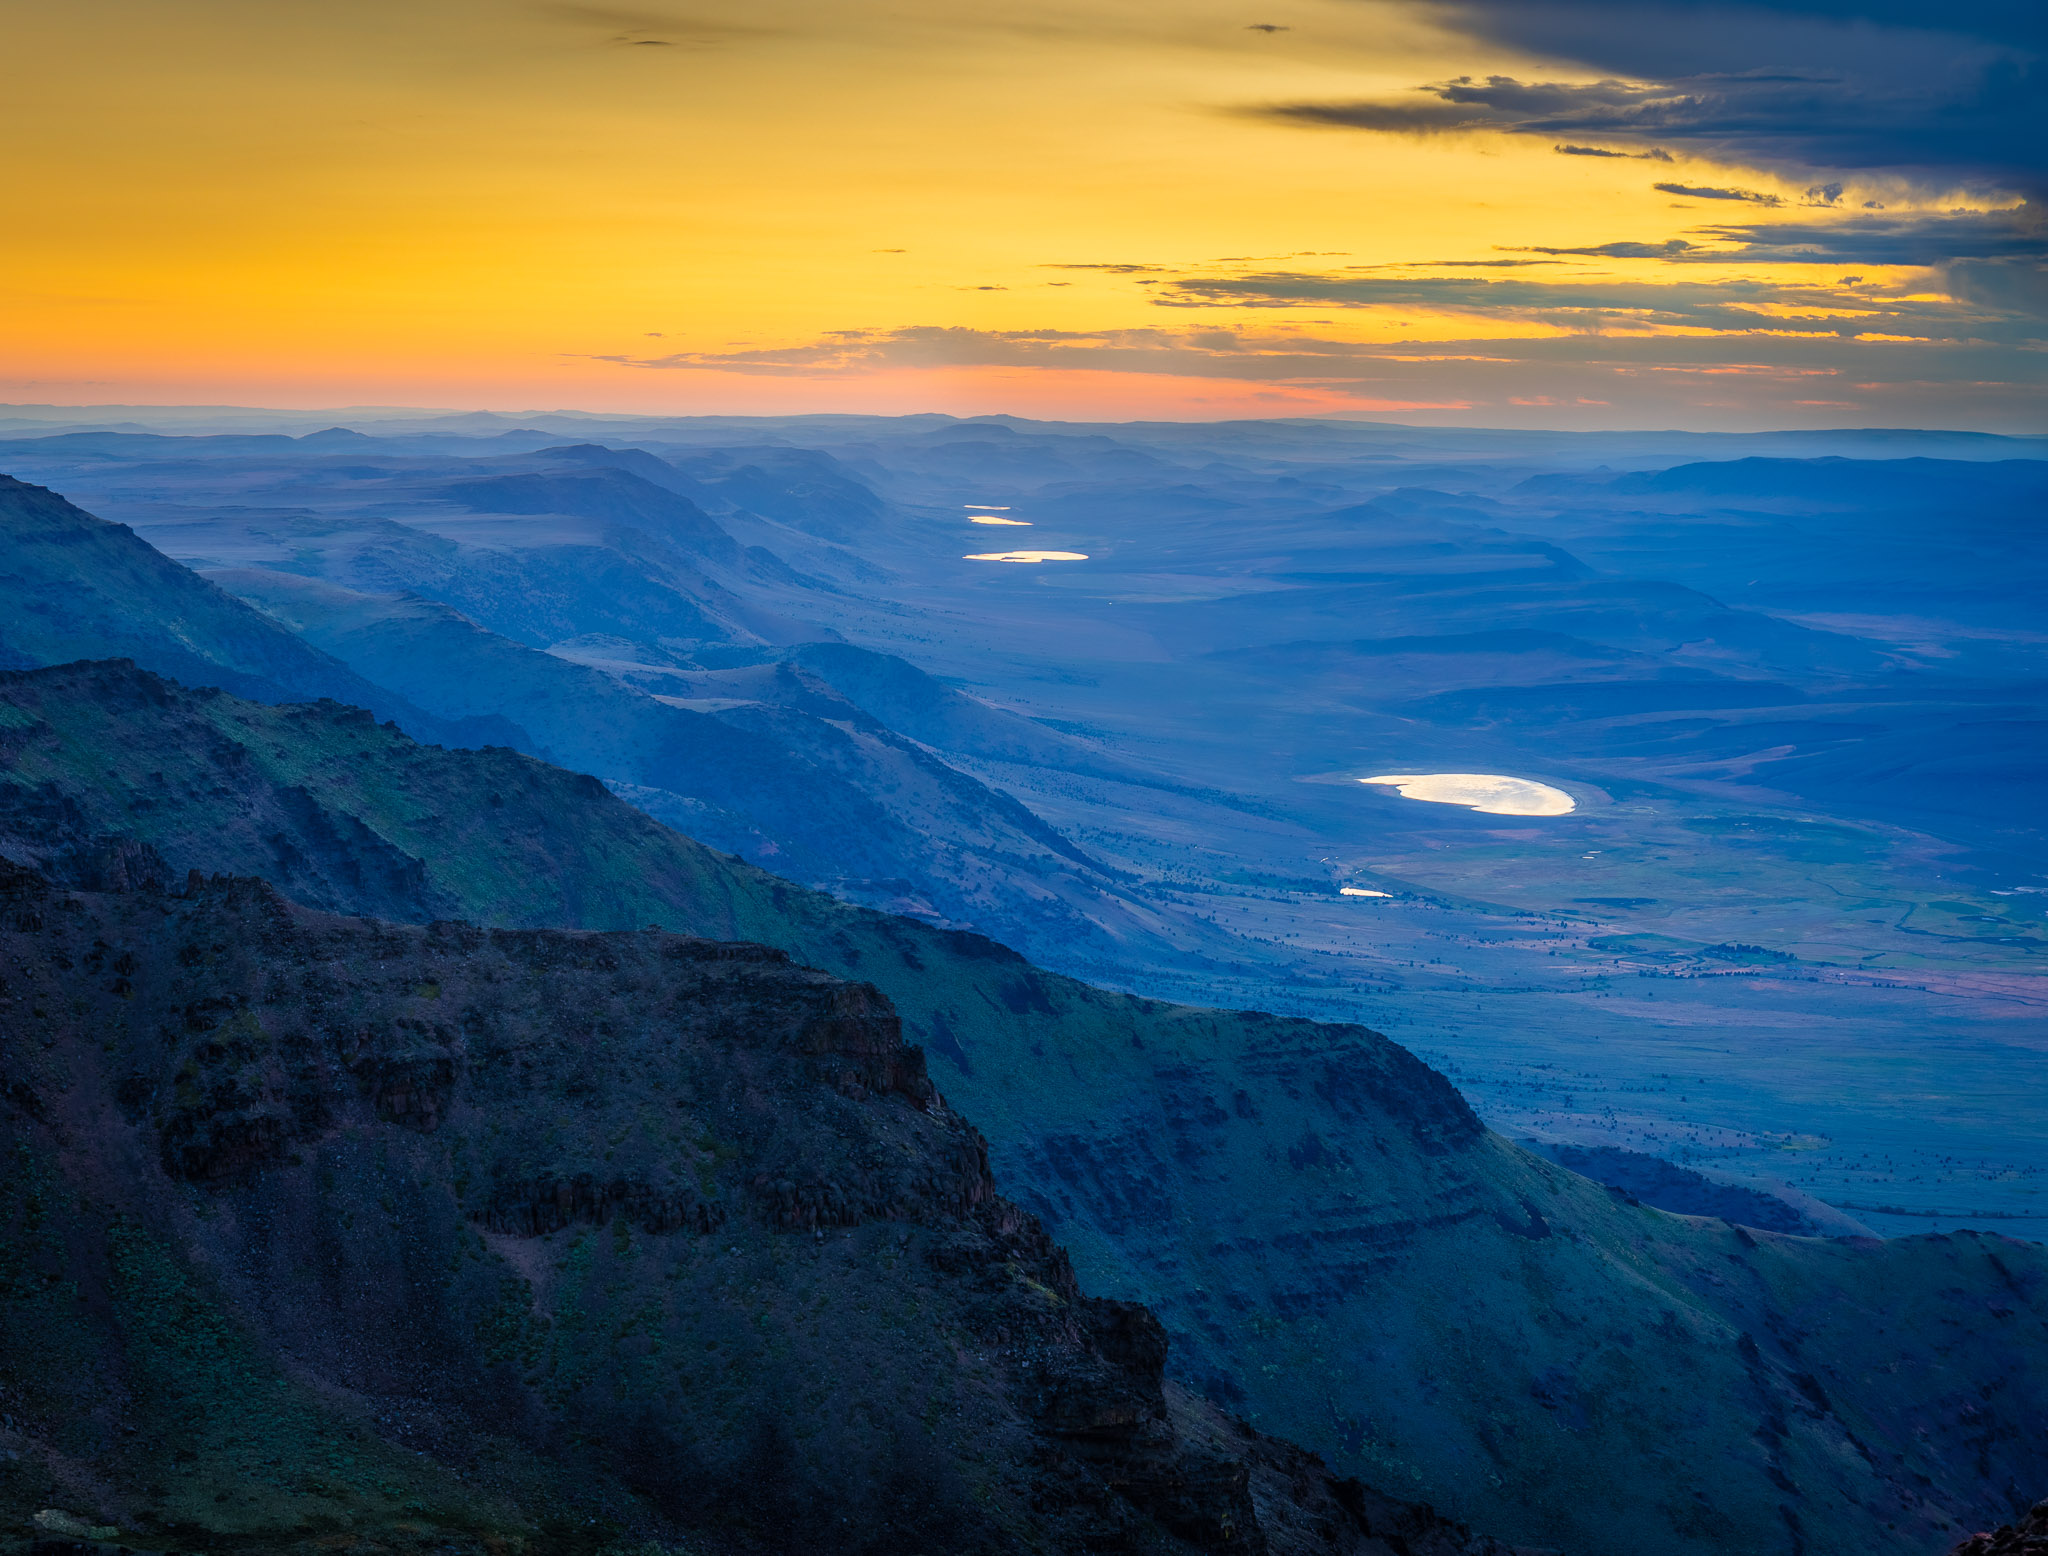 Sunrise over Steens Rift, filled with Mann, Ten Cent & unnamed lakes